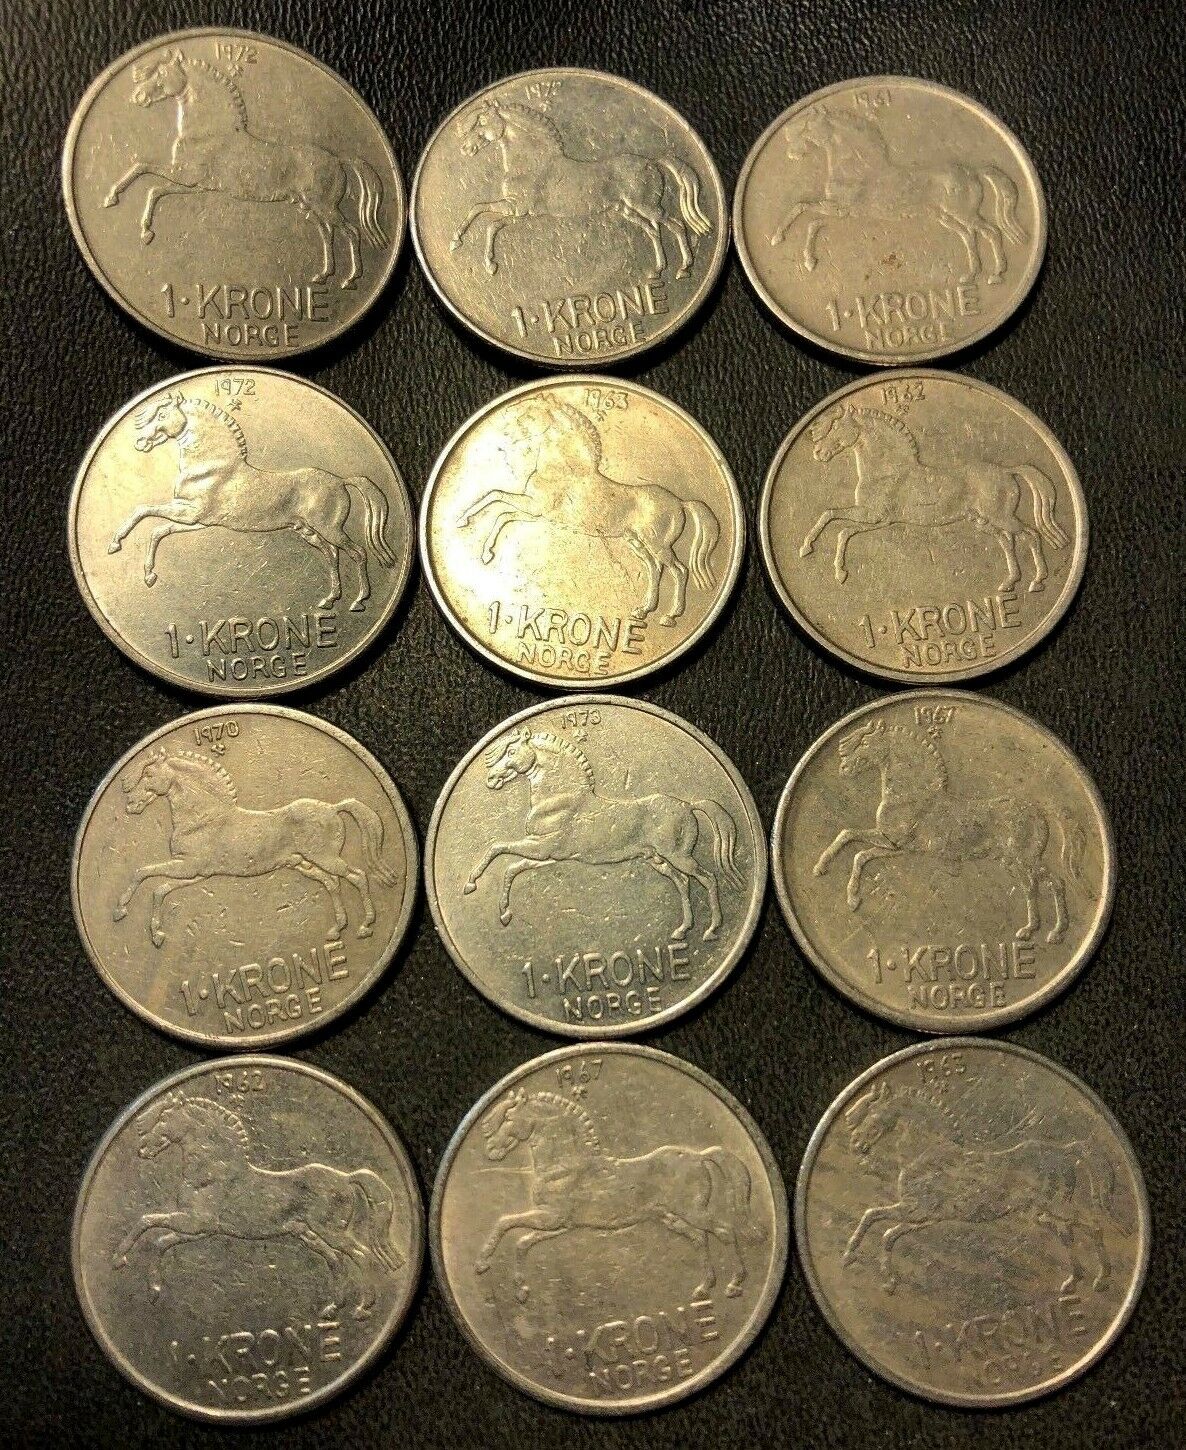 Vintage Norway Coin Lot - Krone - Horse Series - 12 Coins - Free Shipping